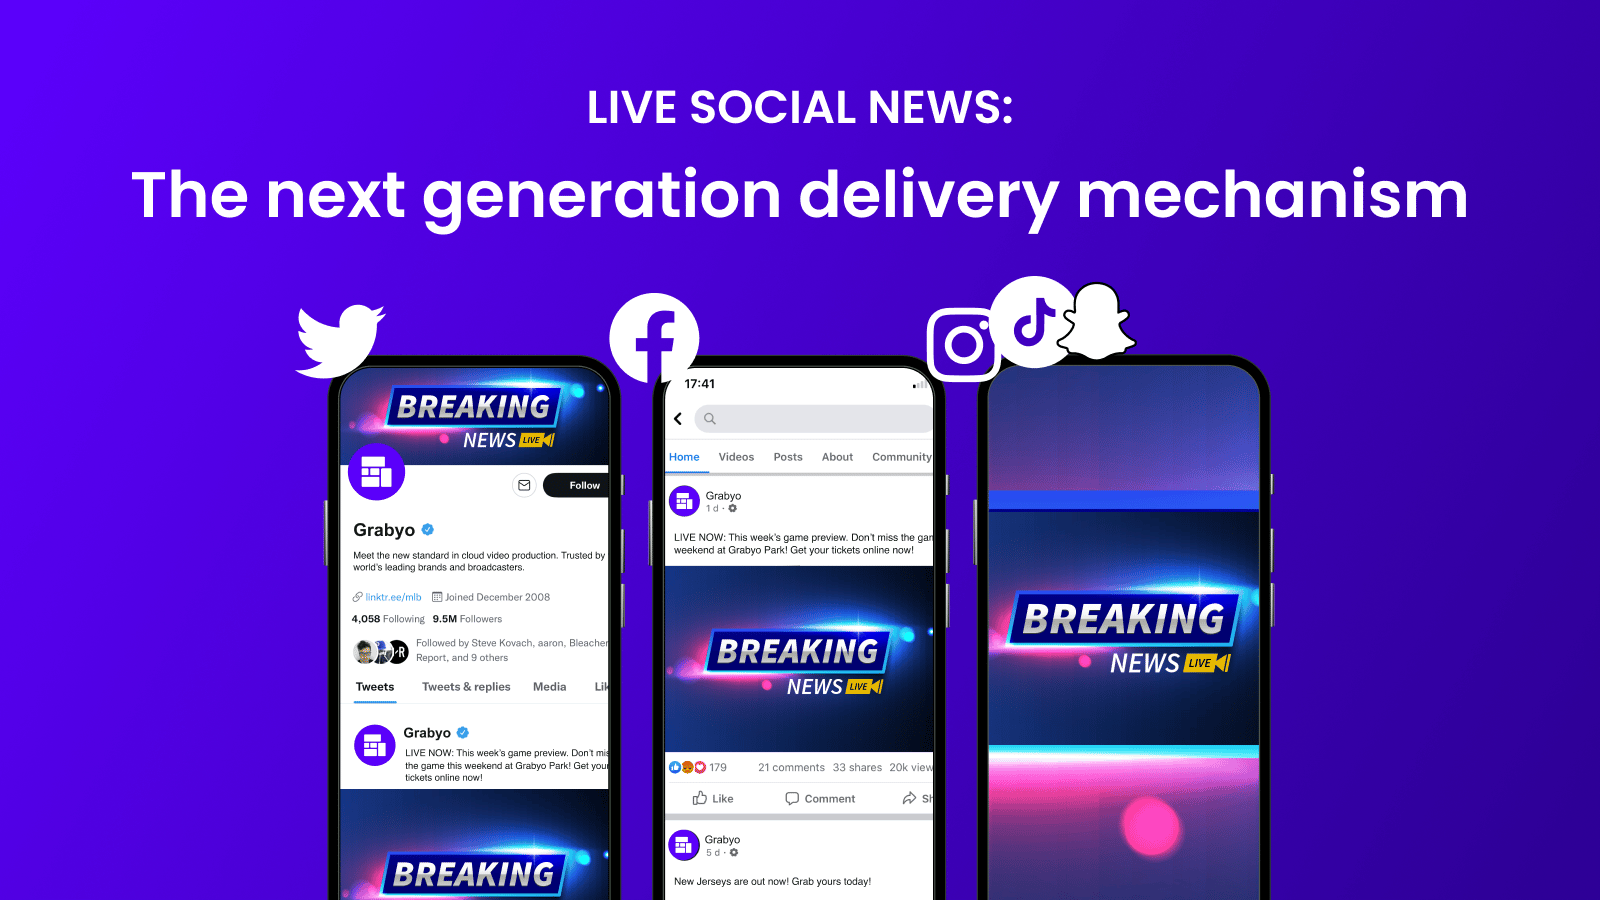 Live social news: The next generation delivery mechanism